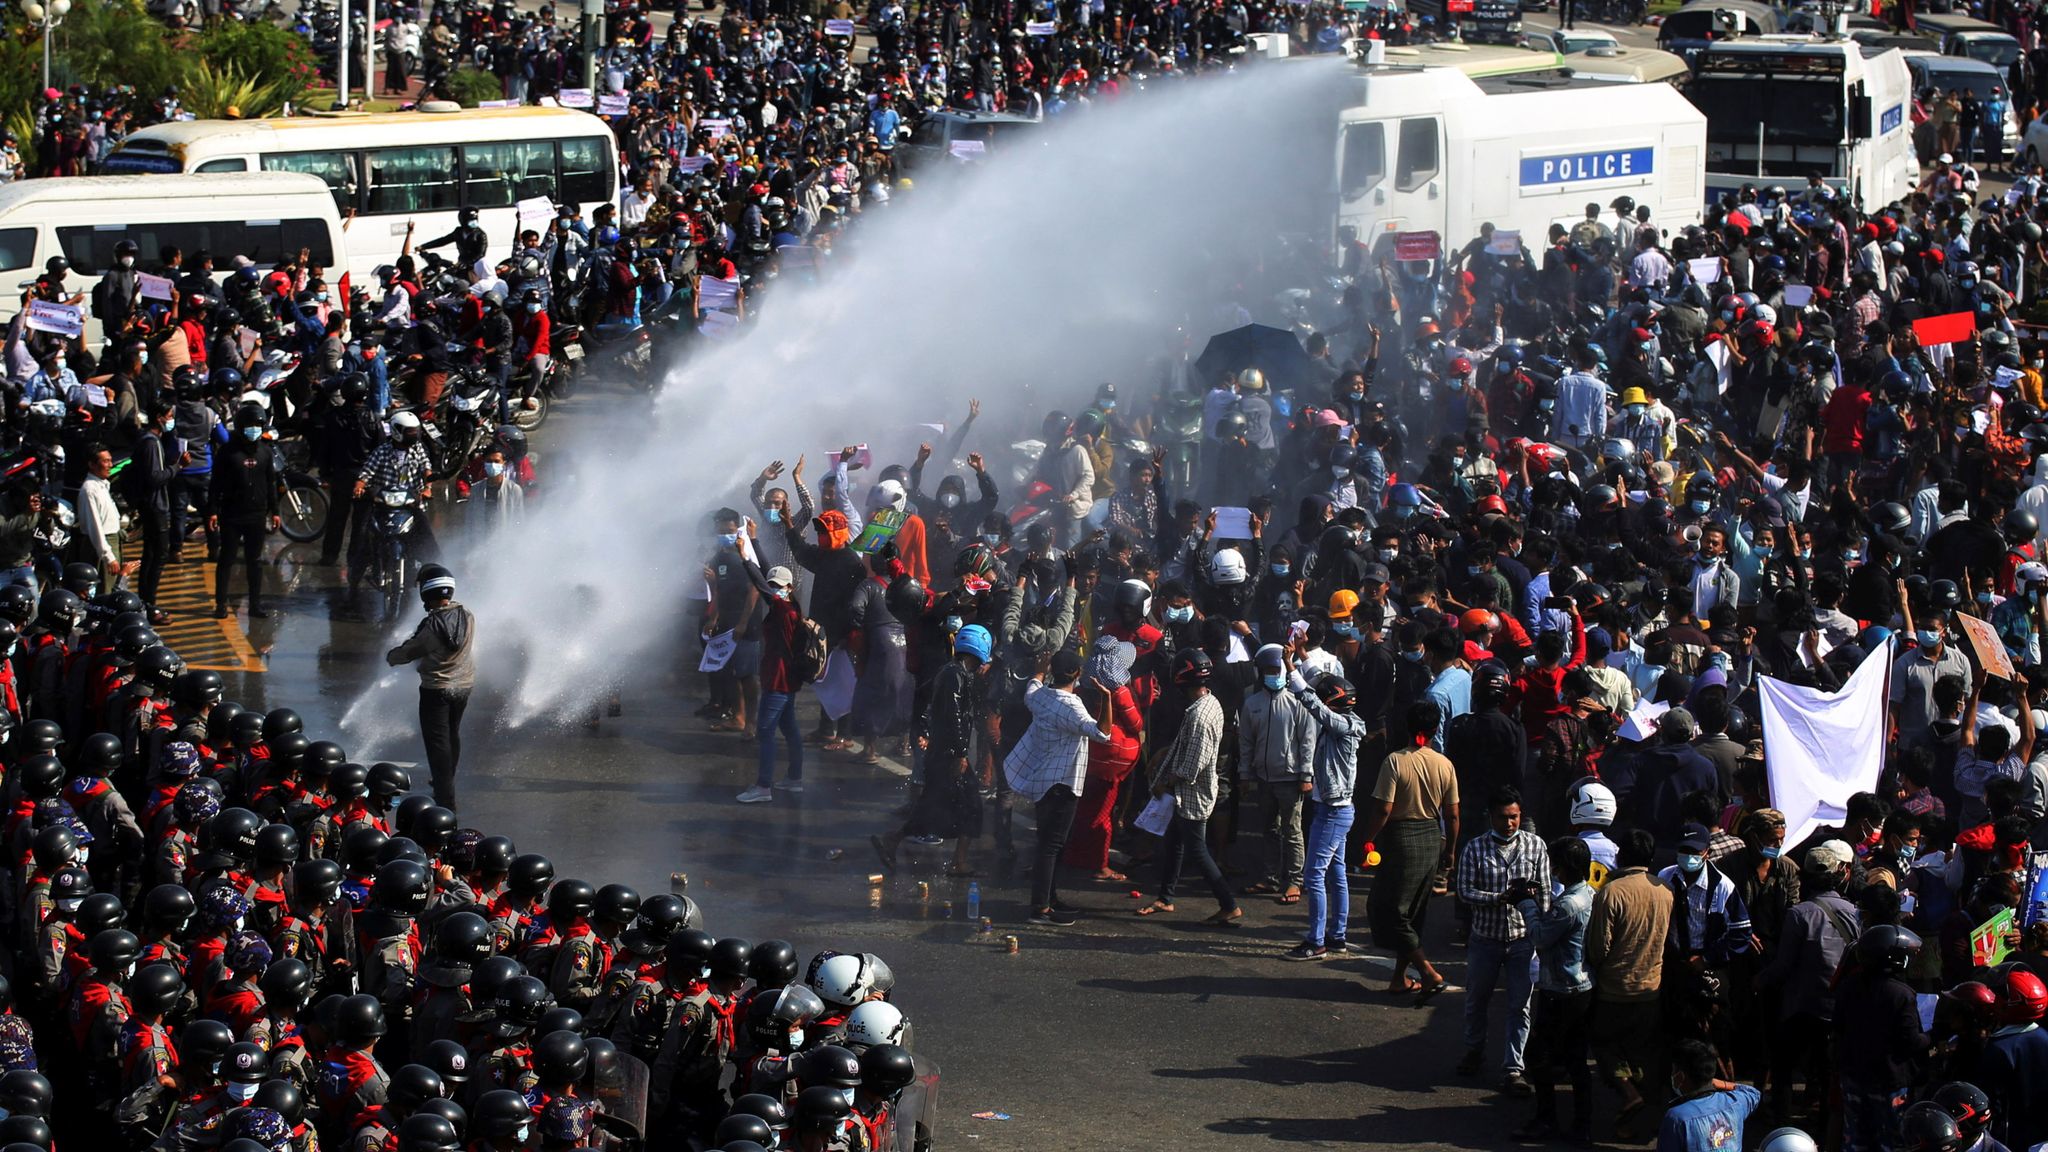 Myanmar: Police fire water cannon as protests grow over military coup |  World News | Sky News